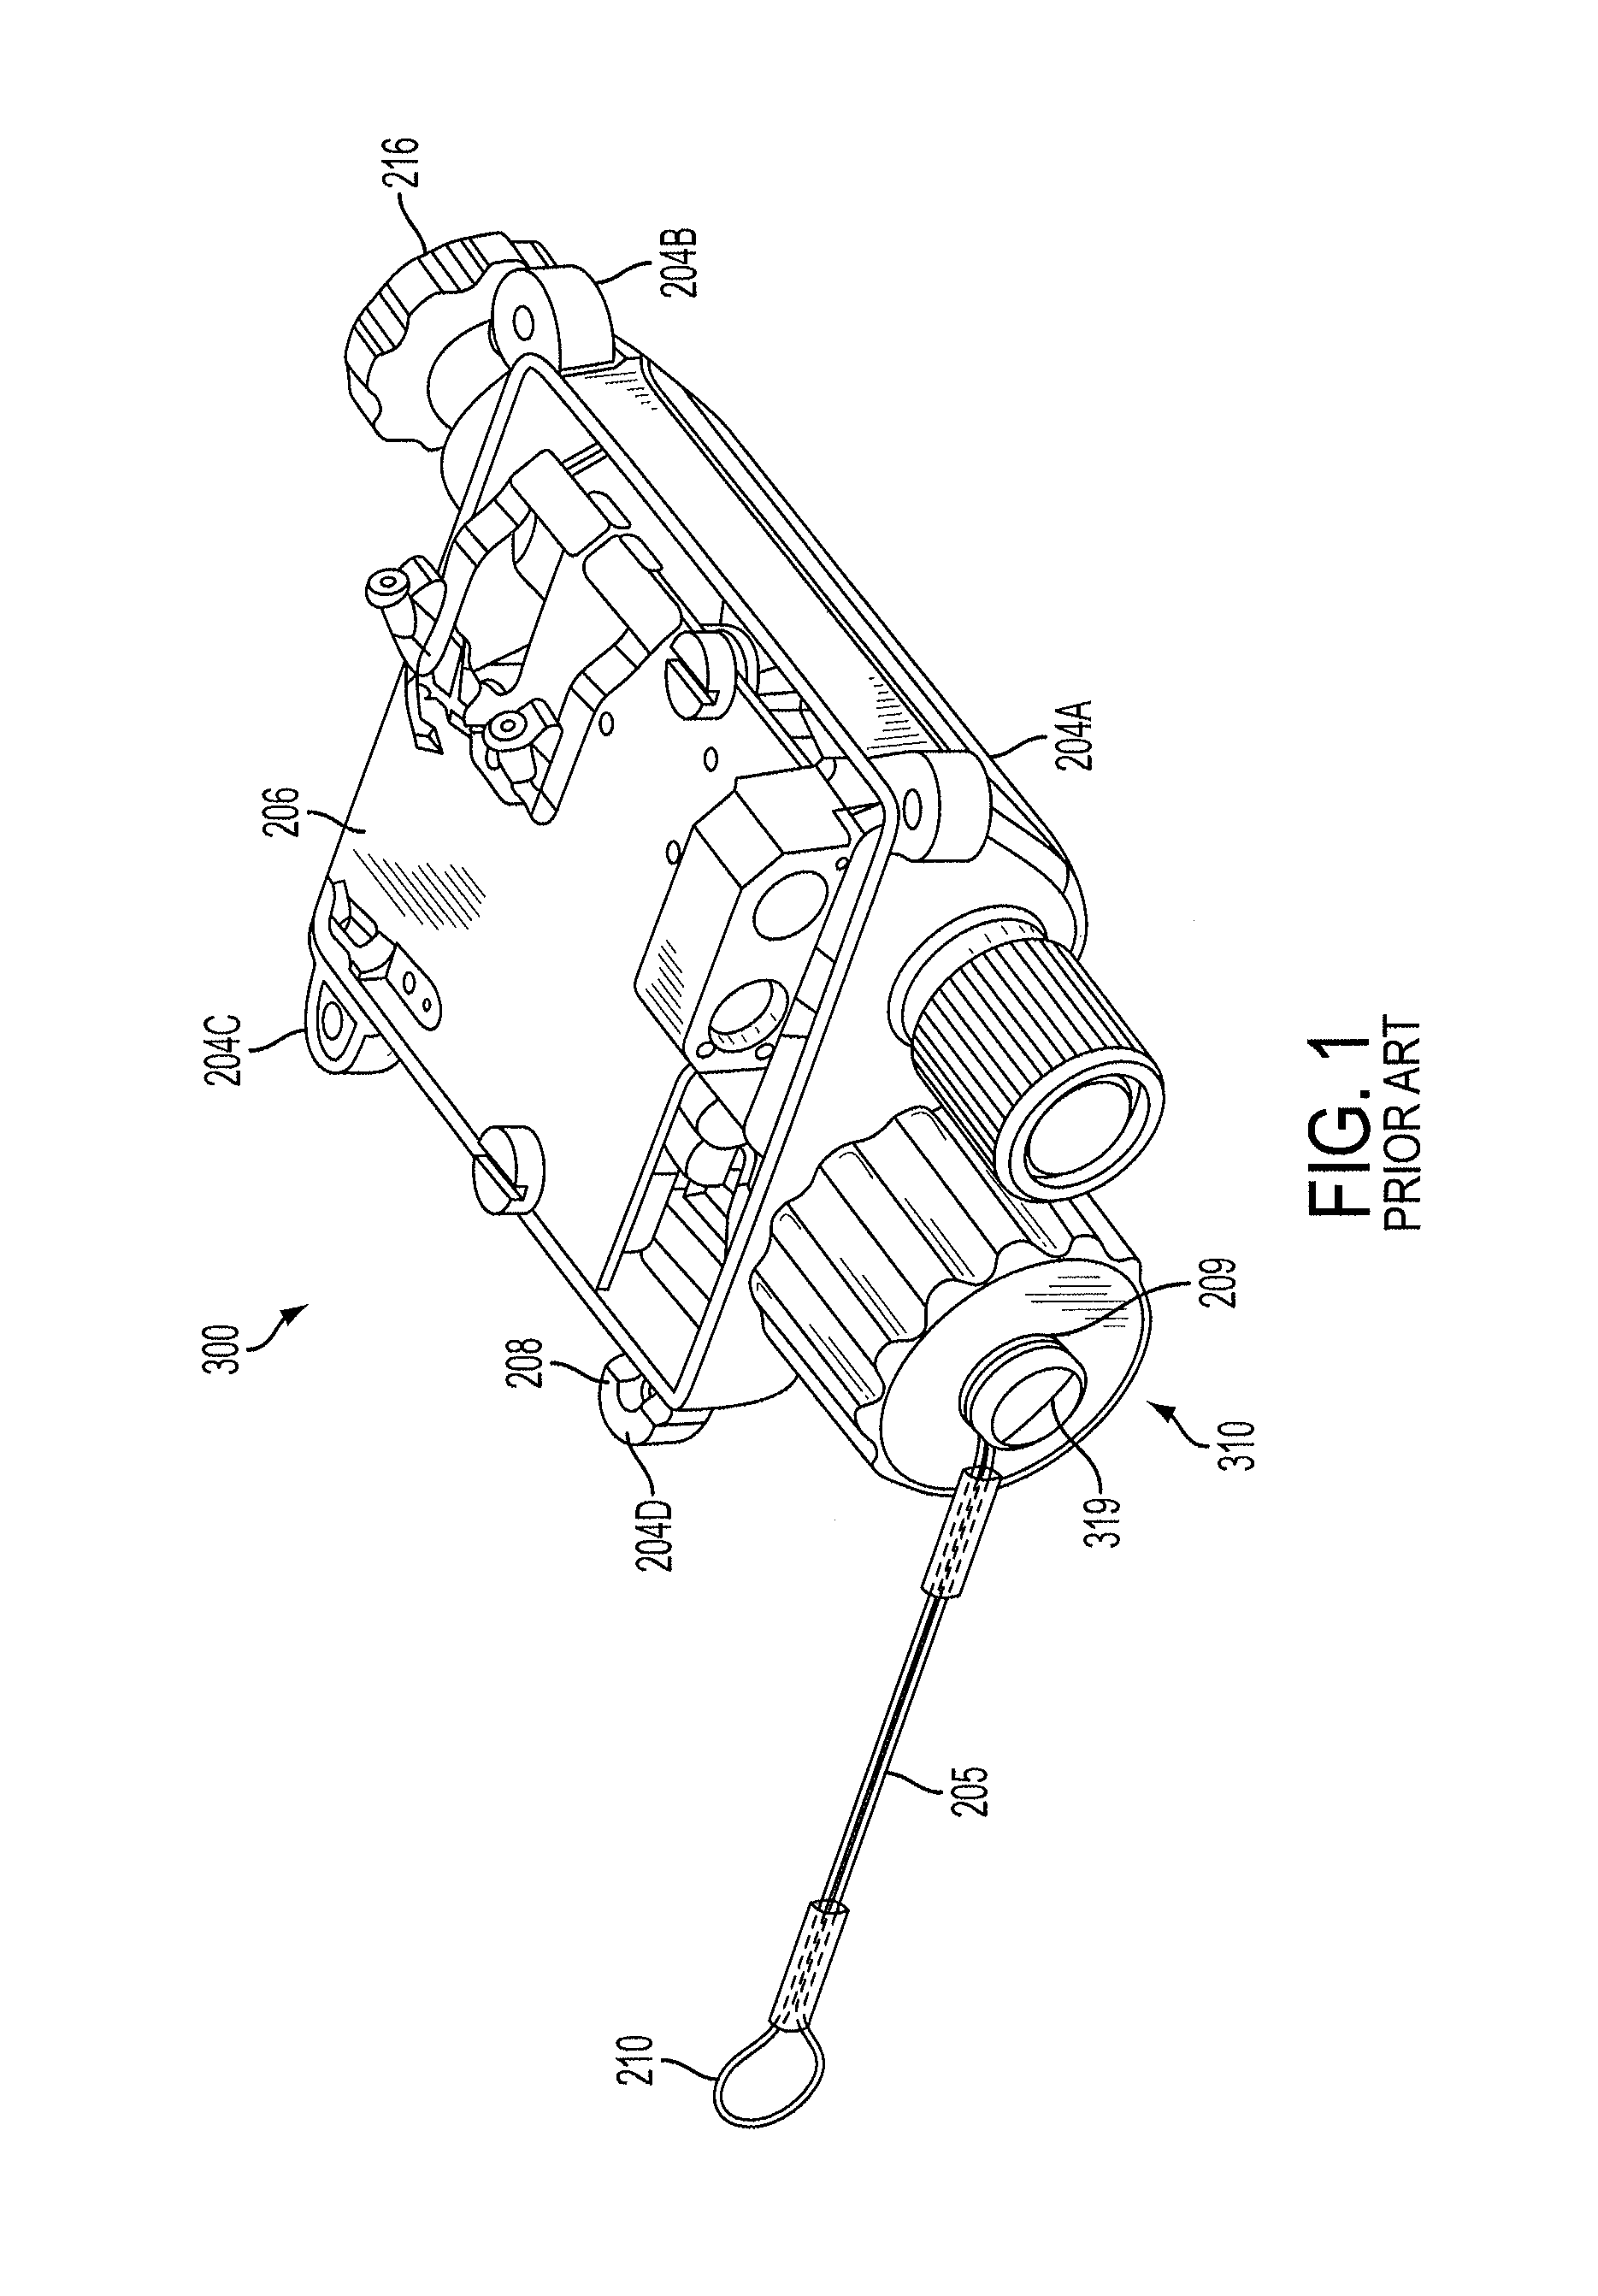 Battery housing with reverse polarity protection